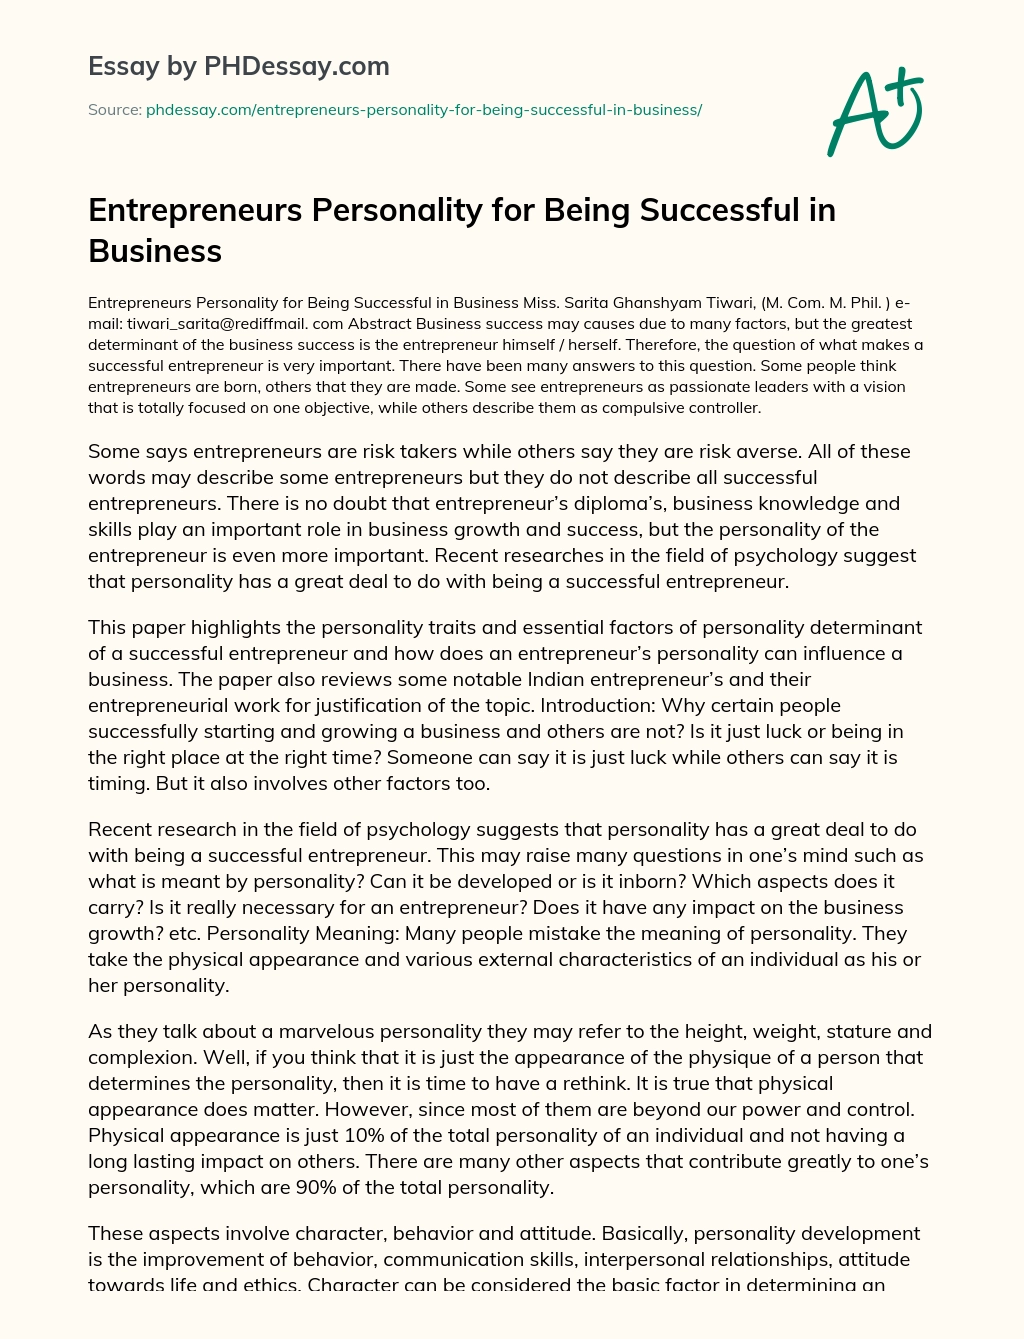 Entrepreneurs Personality for Being Successful in Business essay